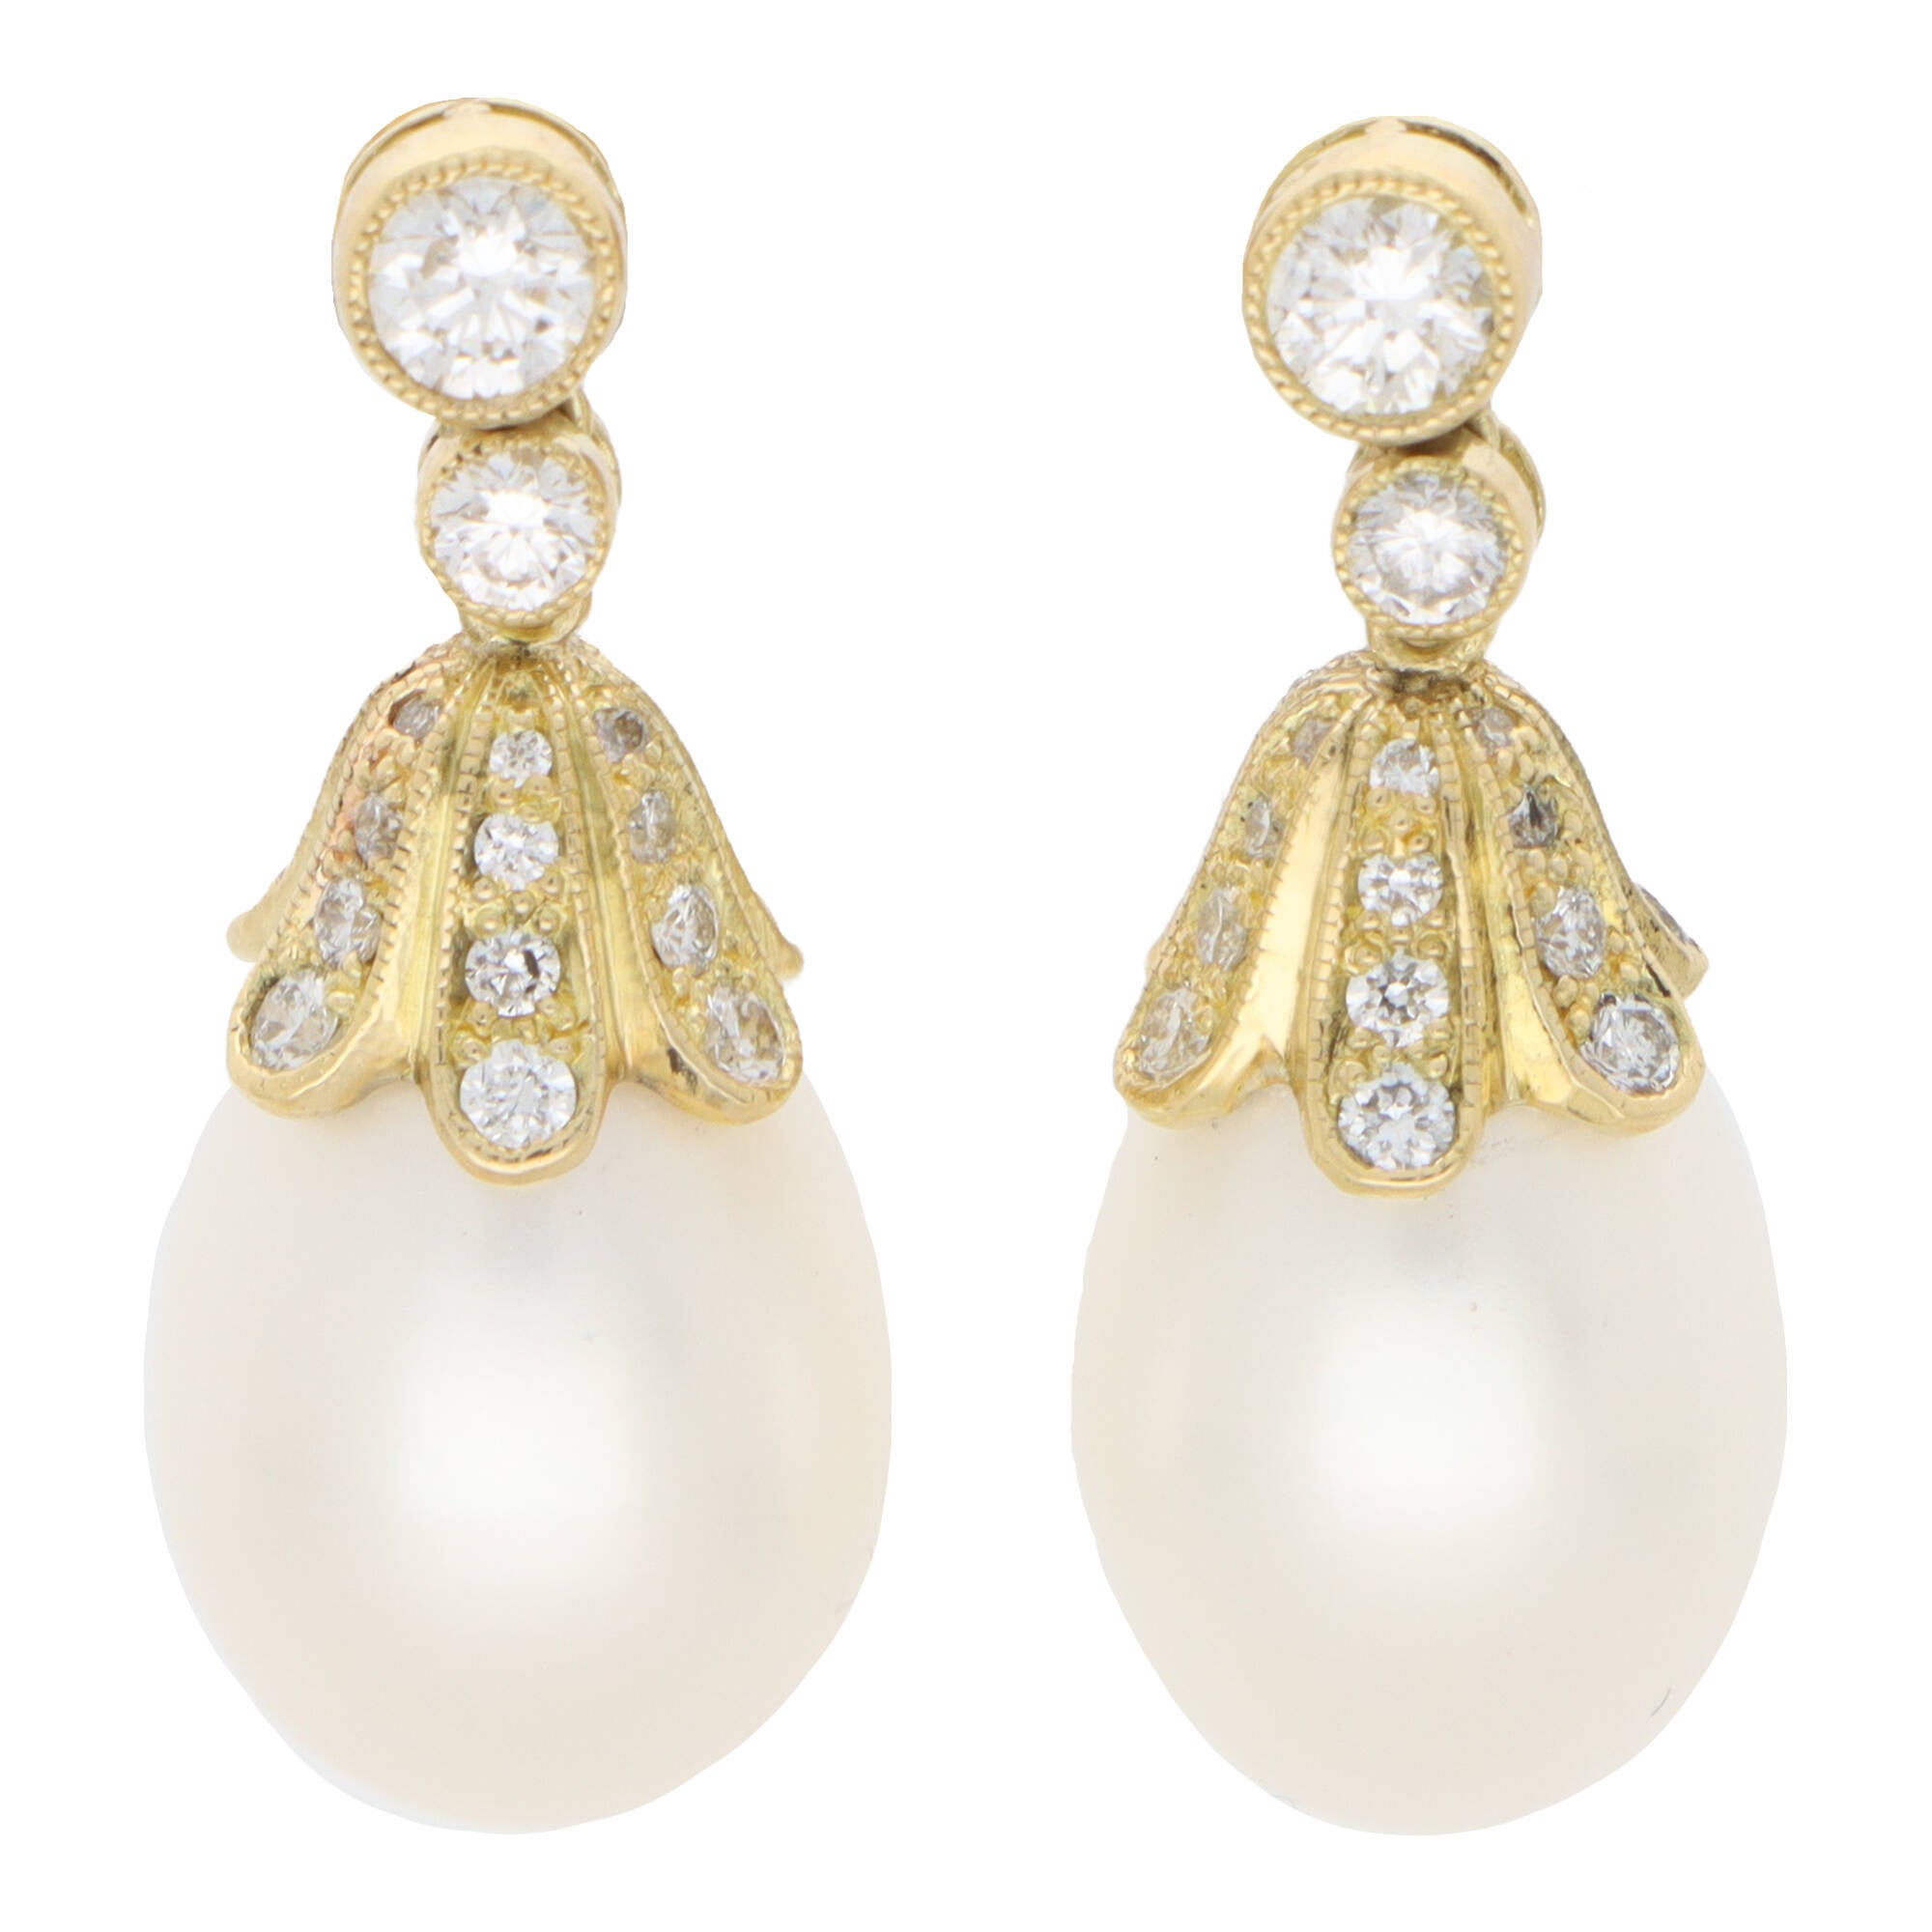  Contemporary Pearl and Diamond Drop Earrings in 18k Yellow Gold